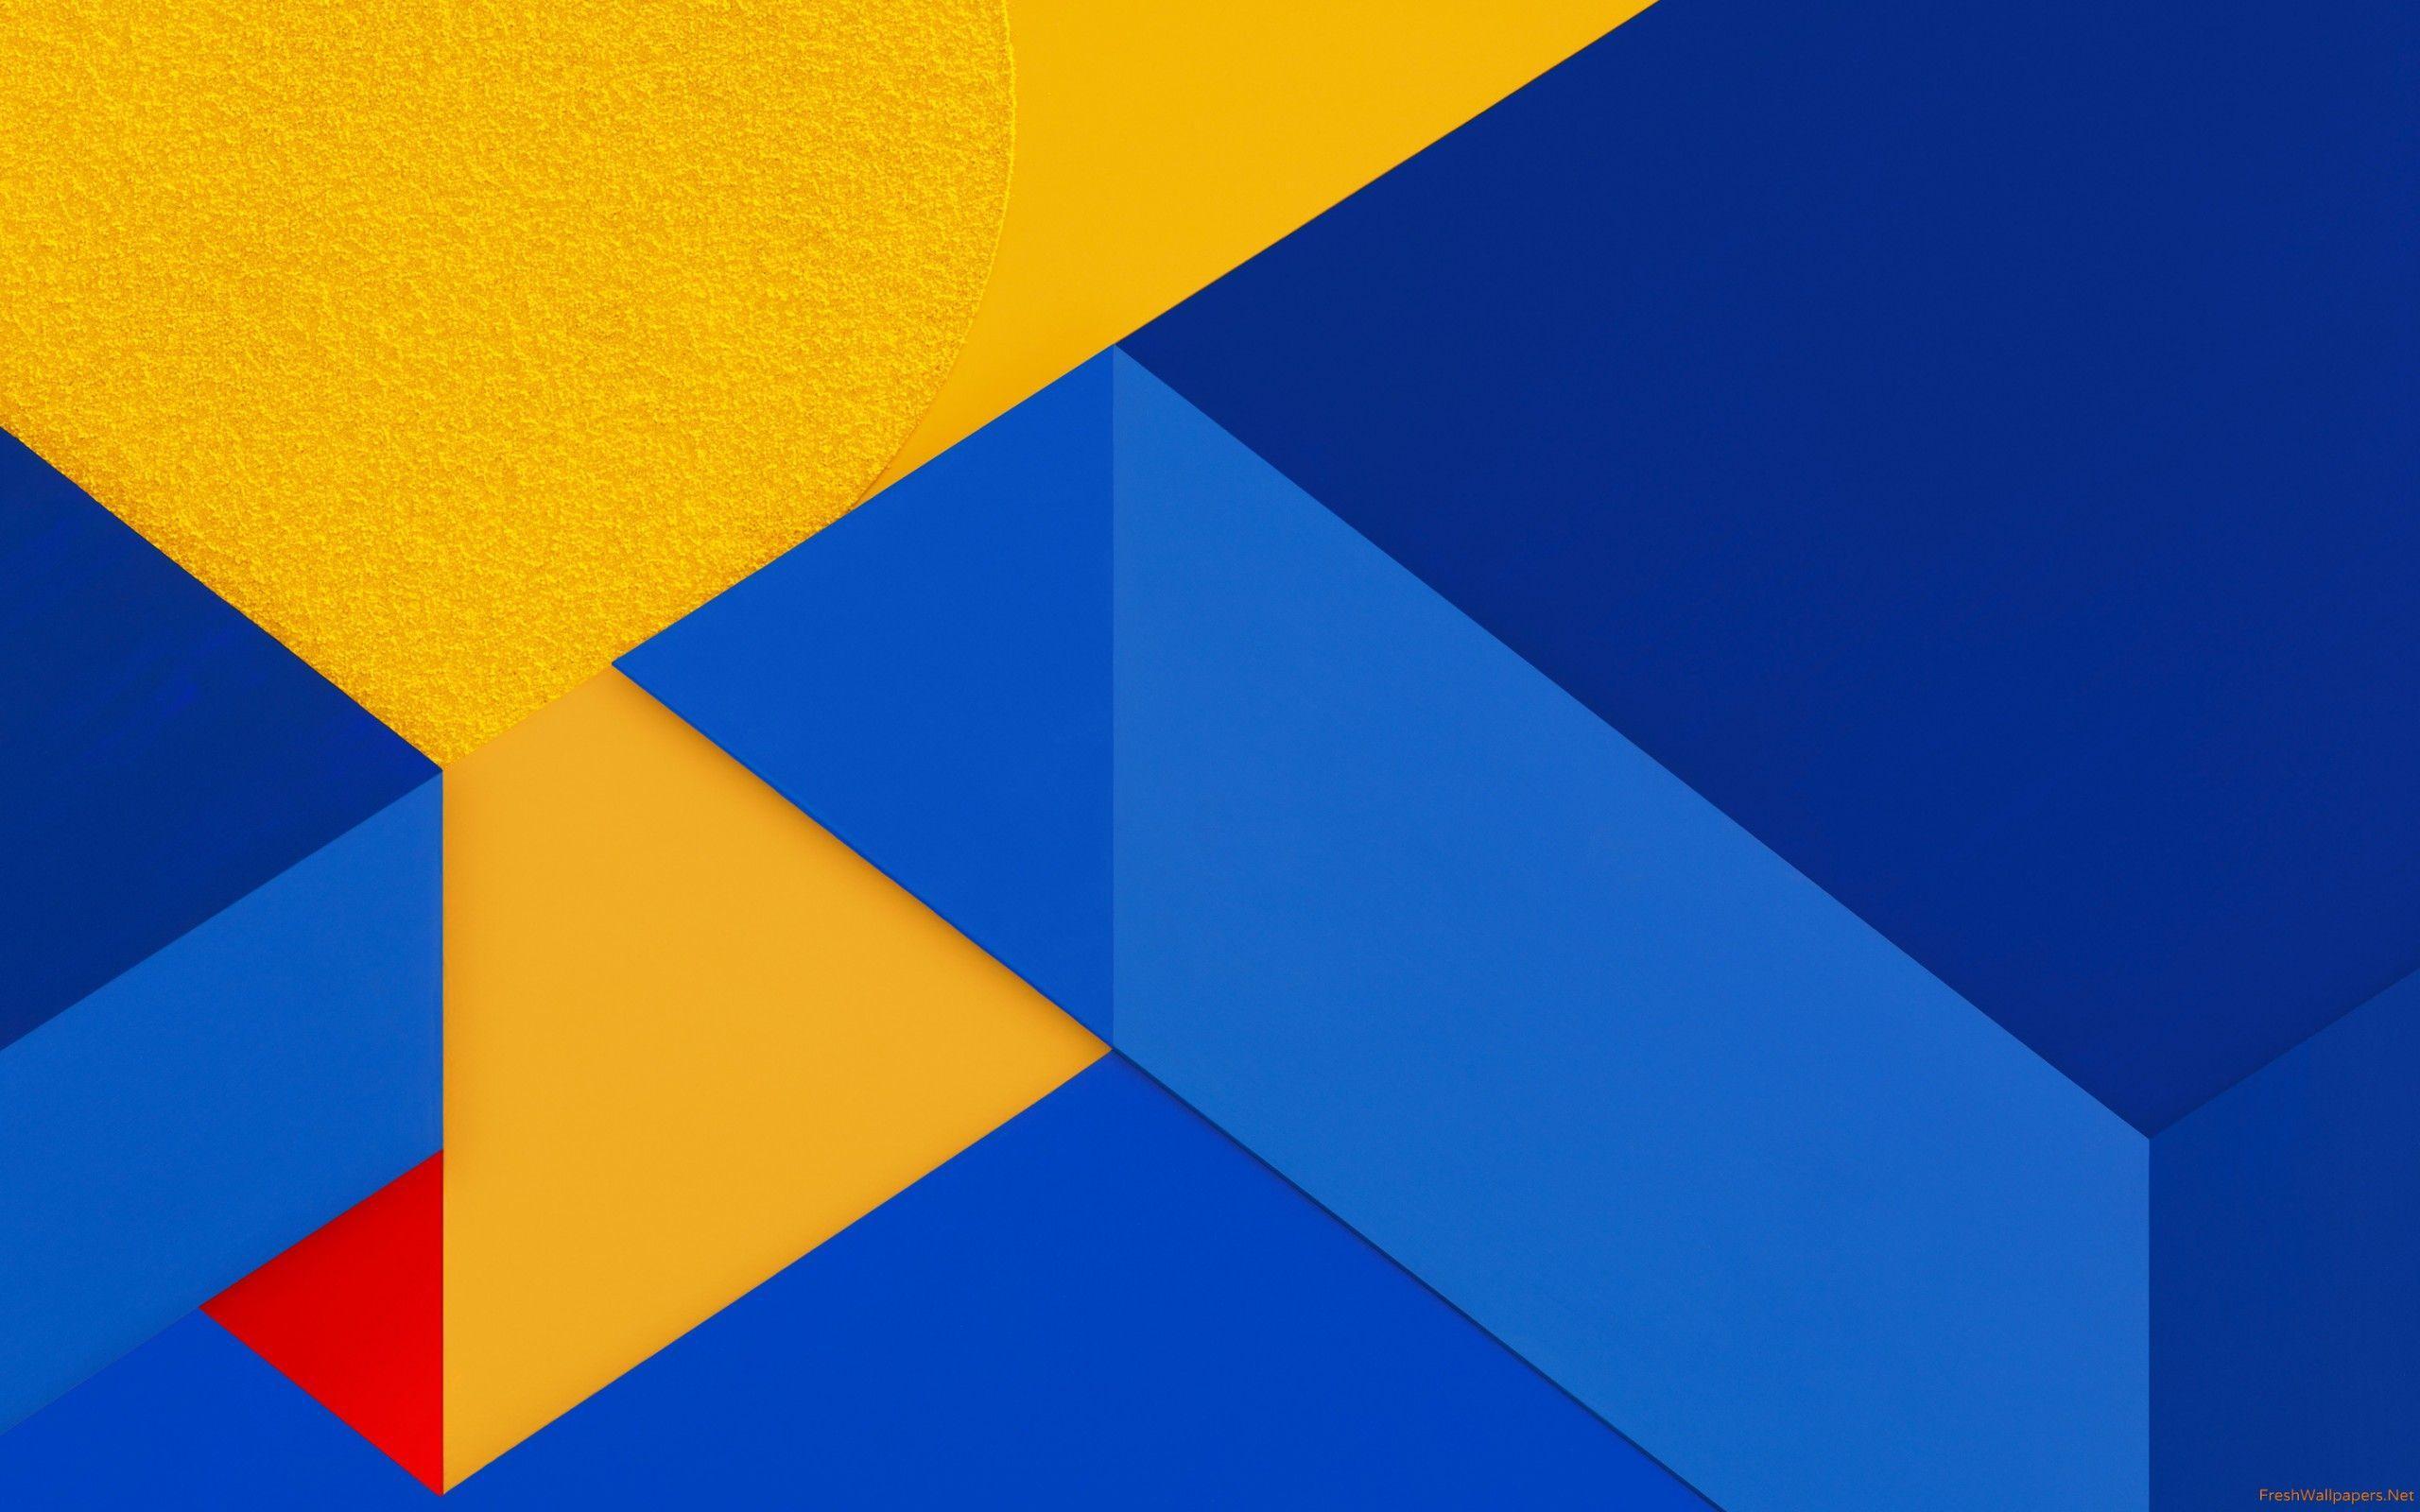 Material Design wallpapers – wallpapers free download